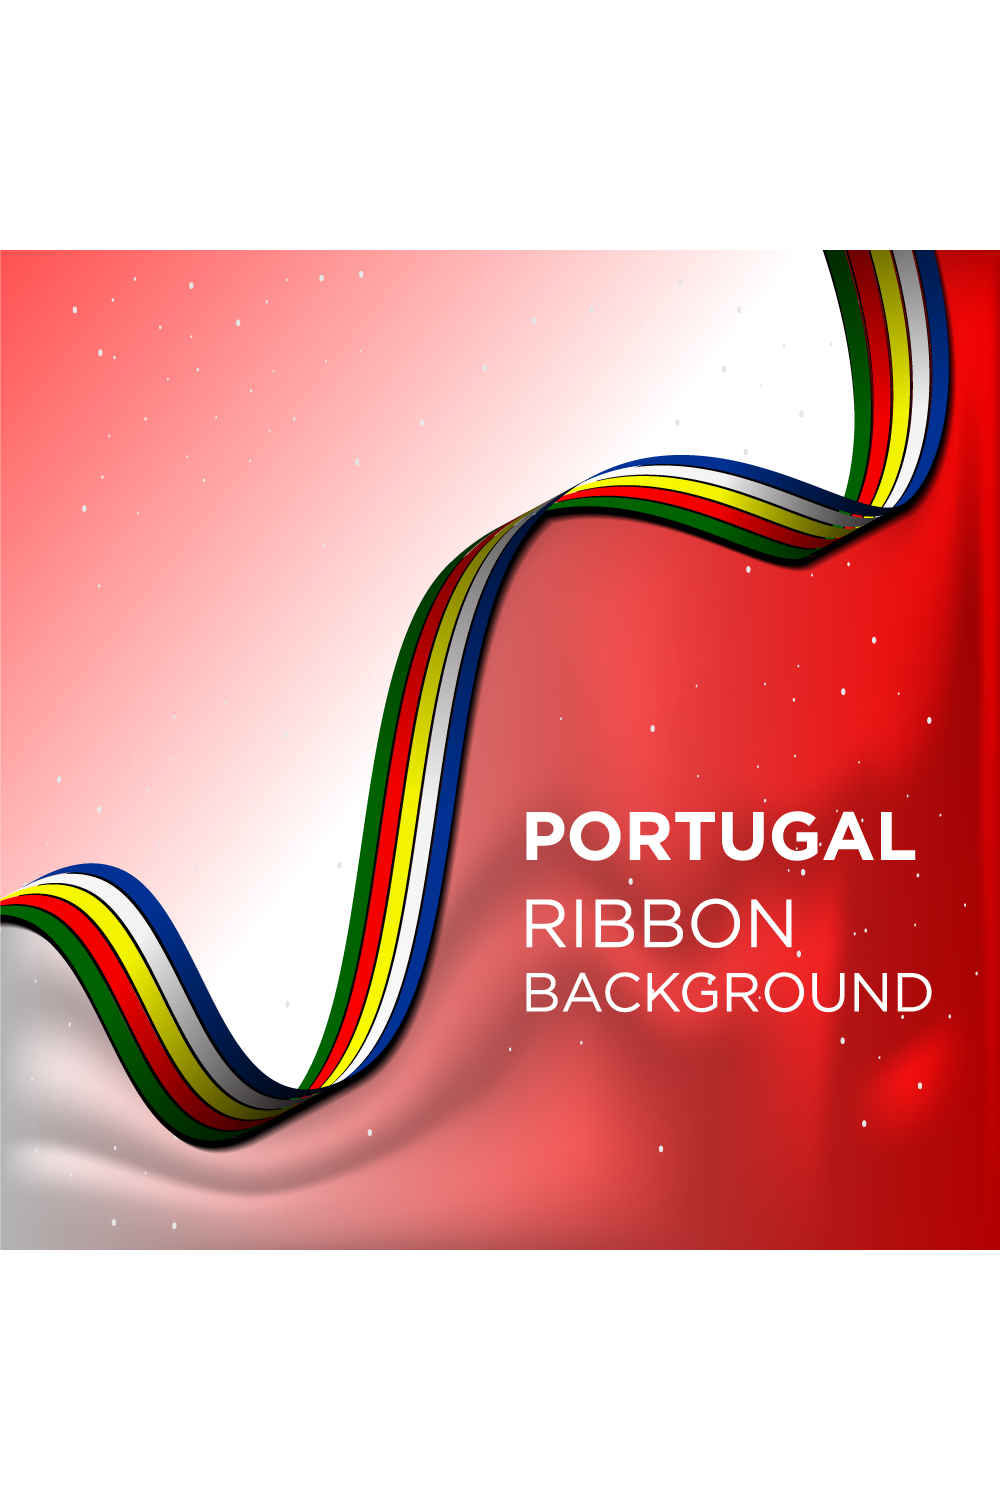 Charming image with Portuguese Ribbon.